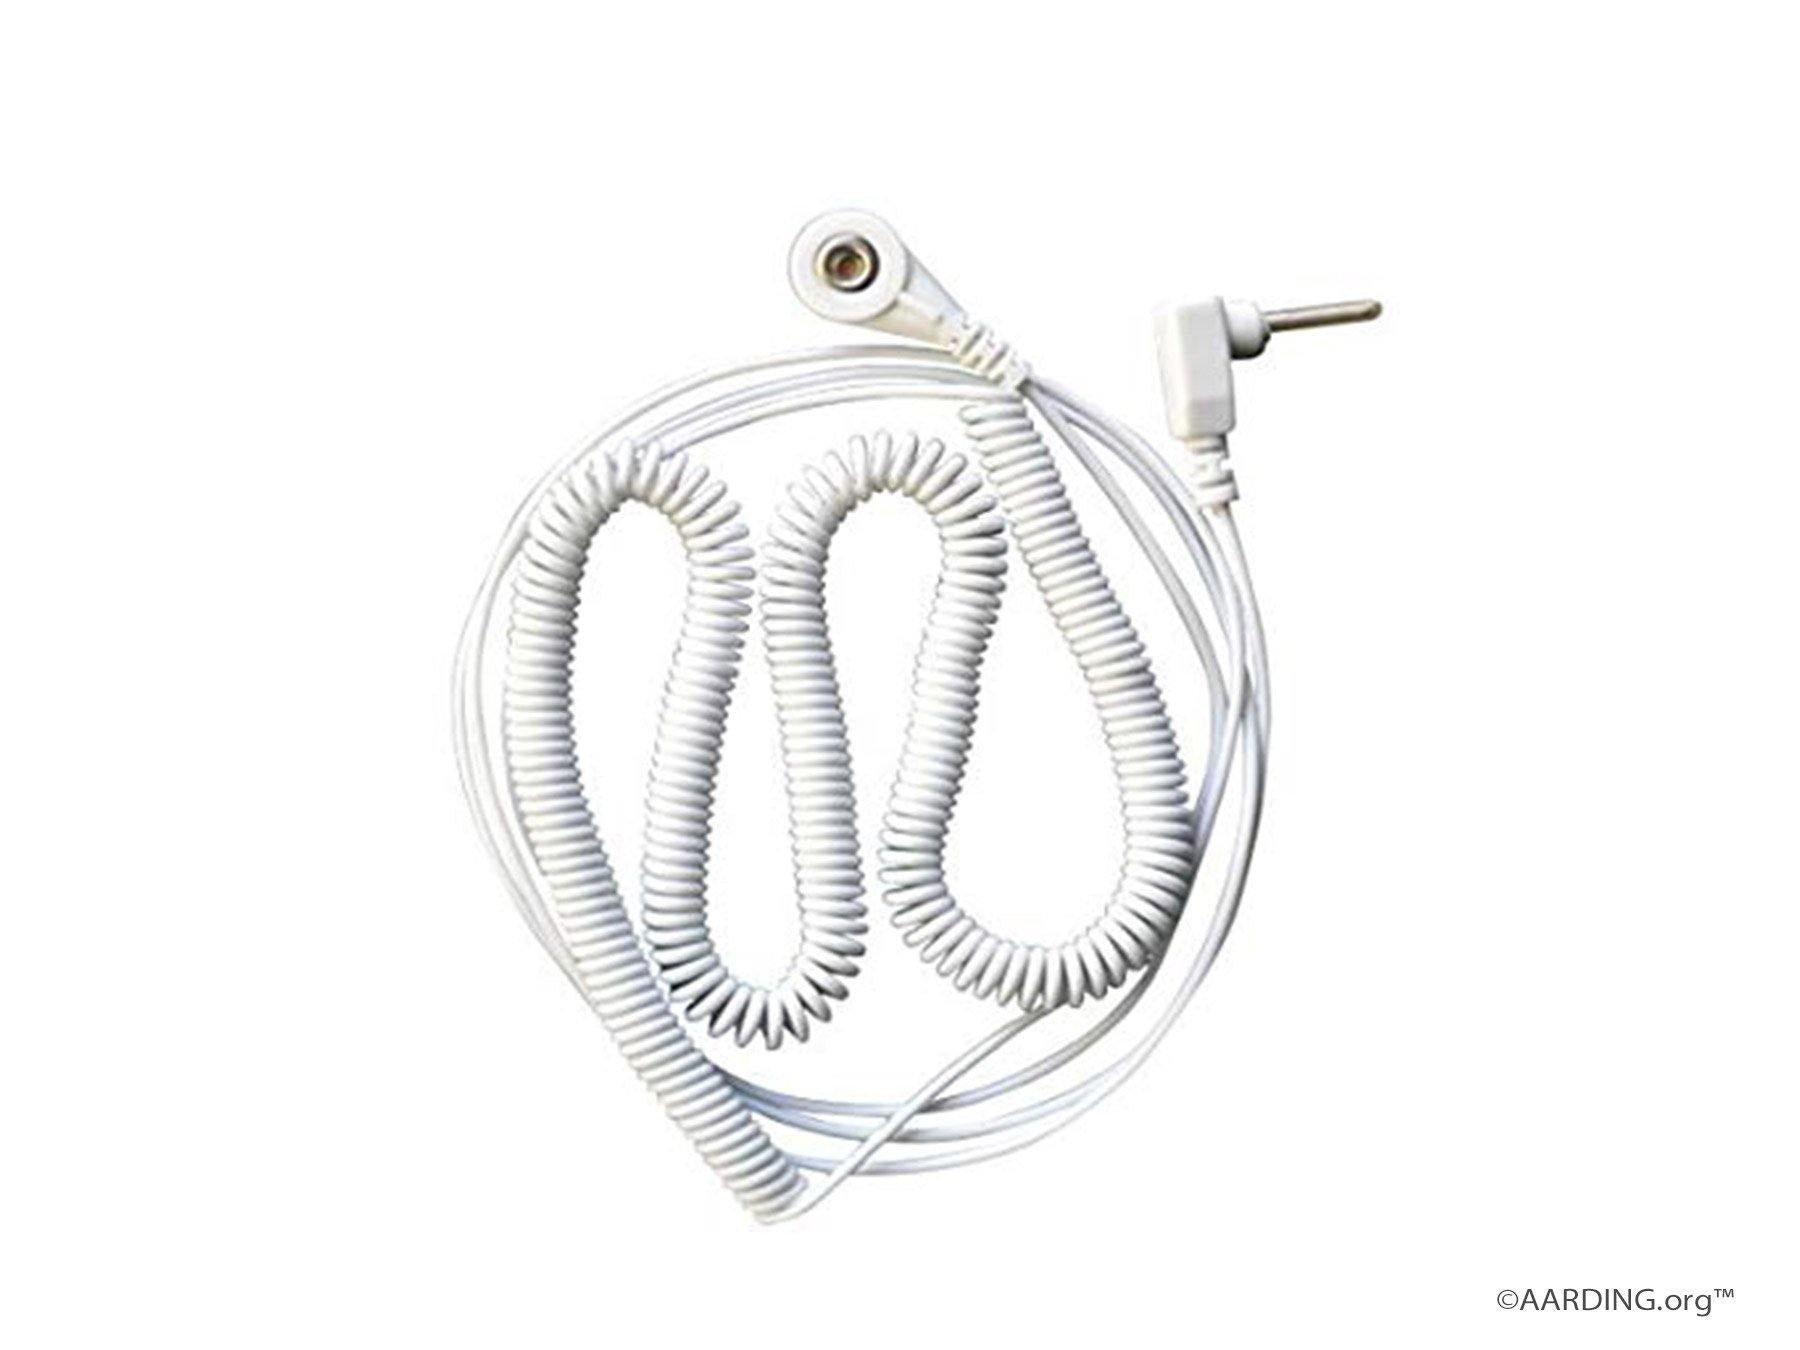 Standaard coiled connection cable 13ft (4m) - Aarding